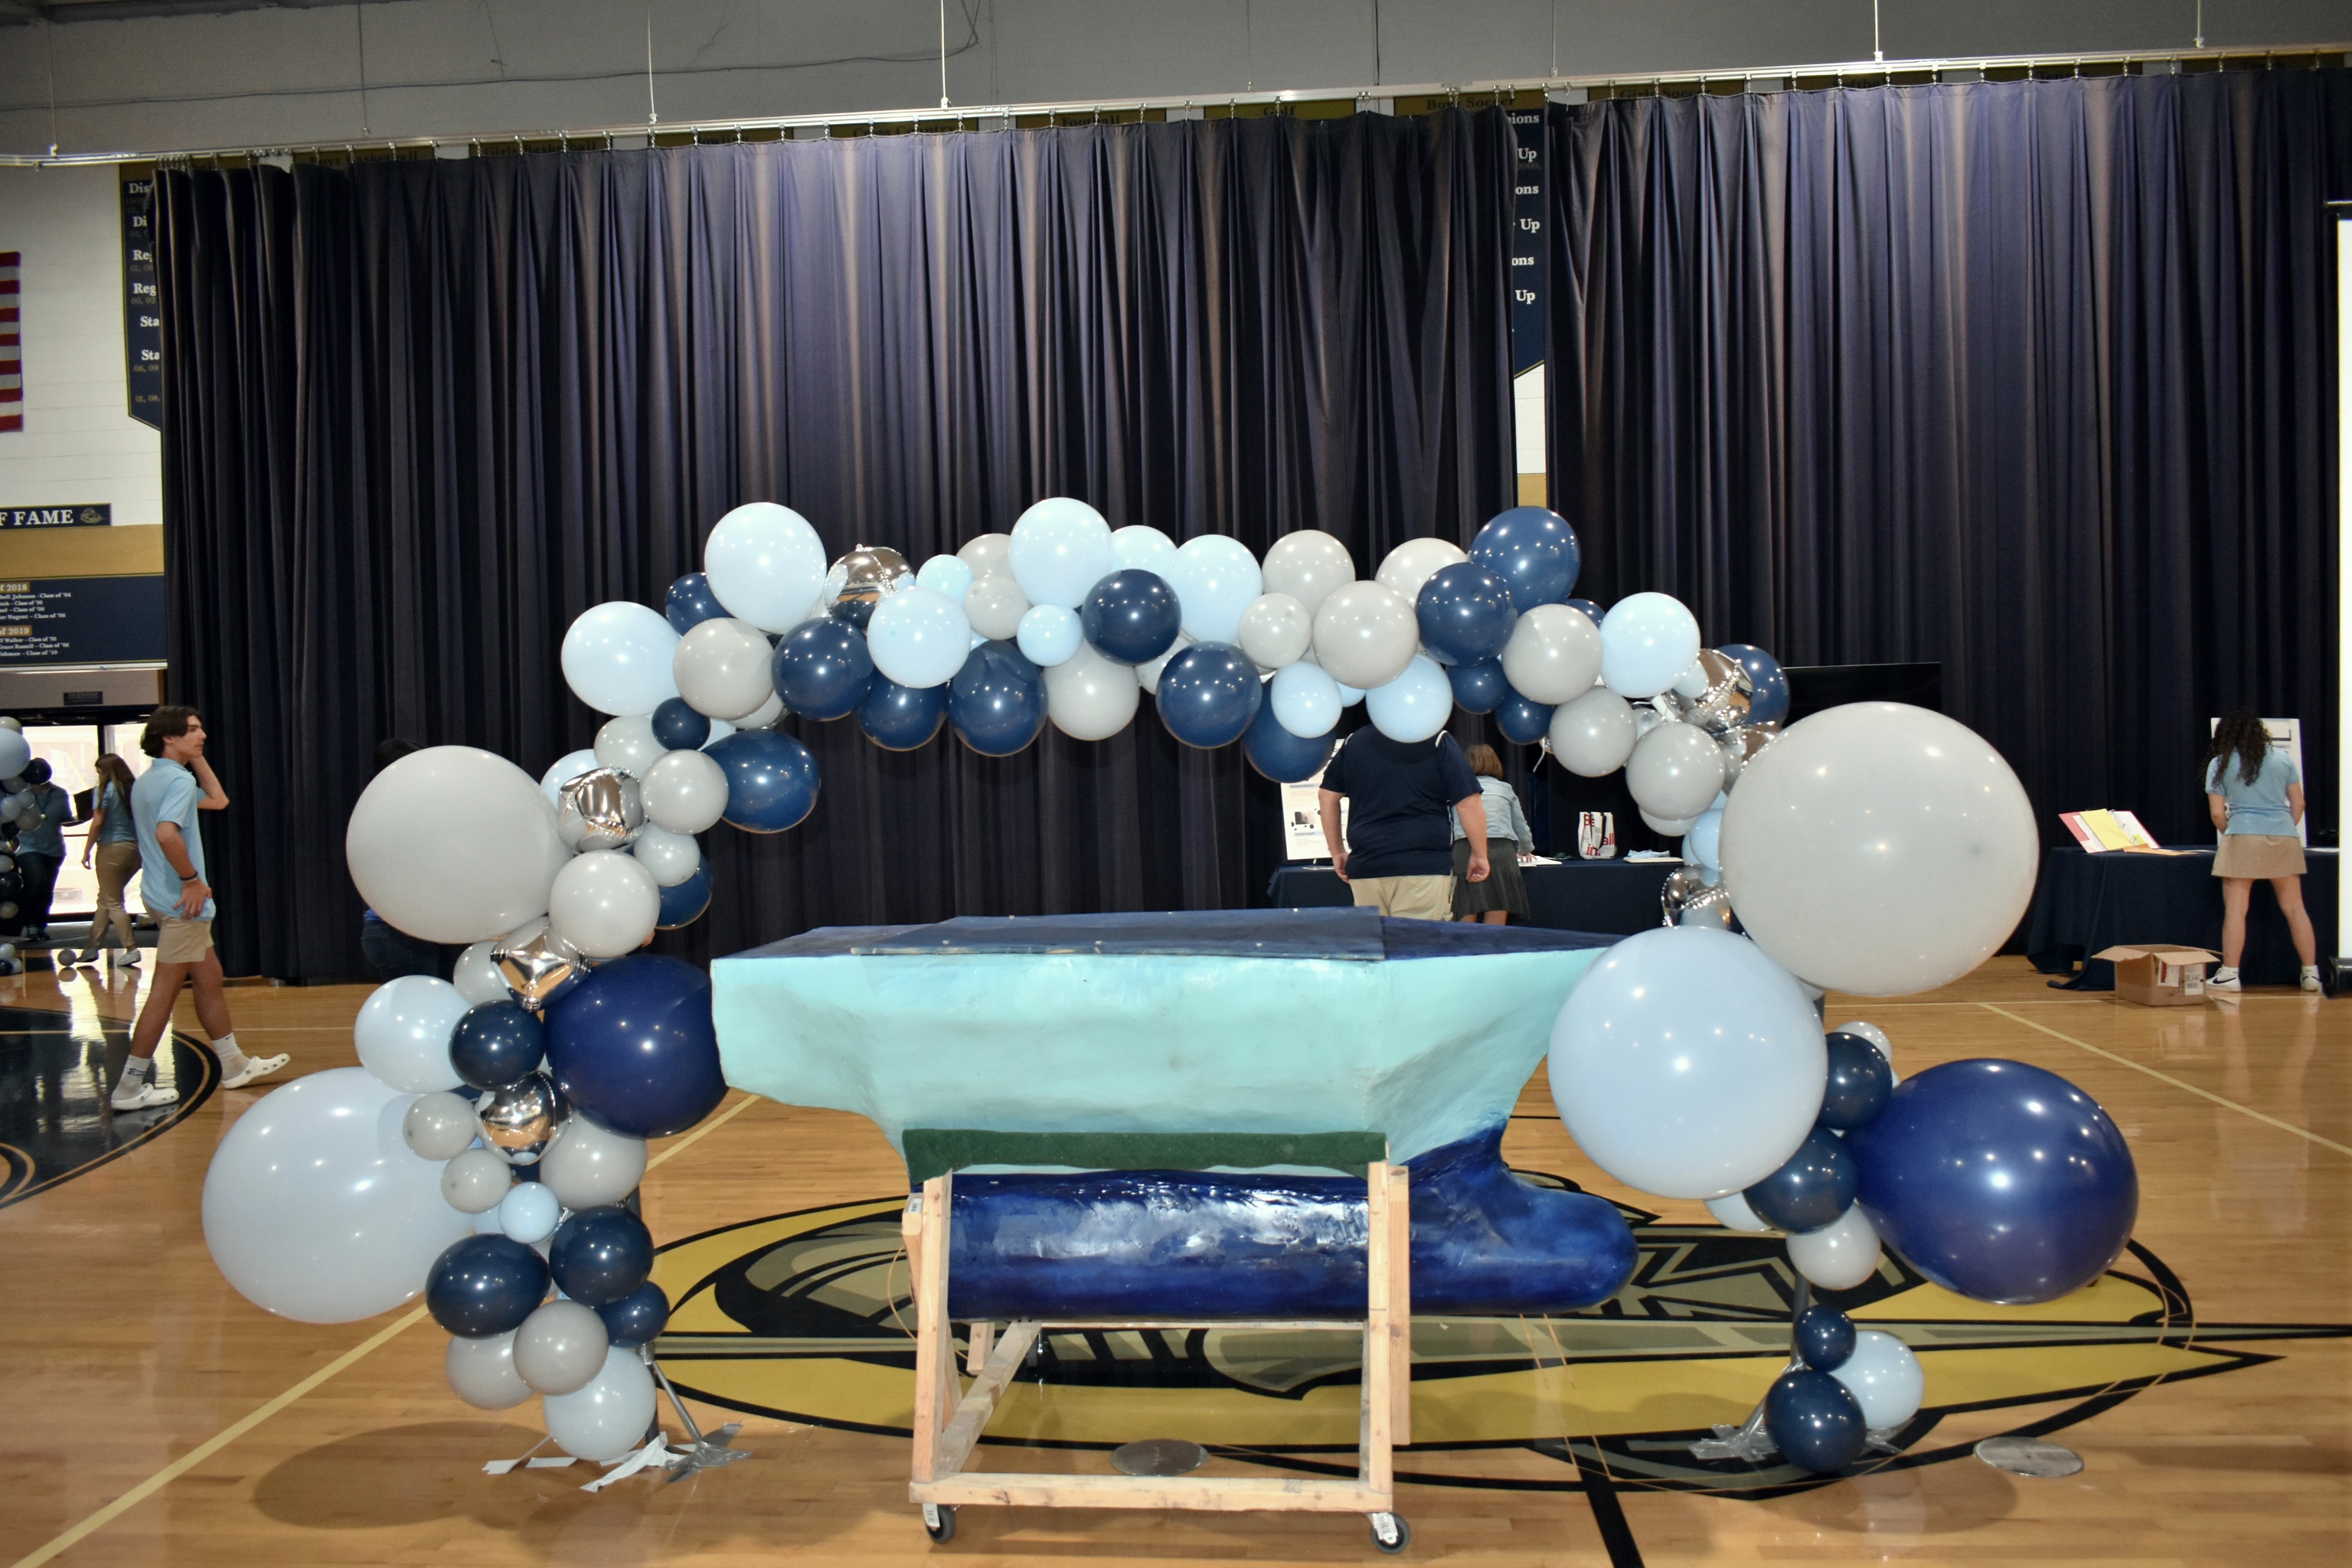 An autonomous marine rover is displayed surrounded by balloons.